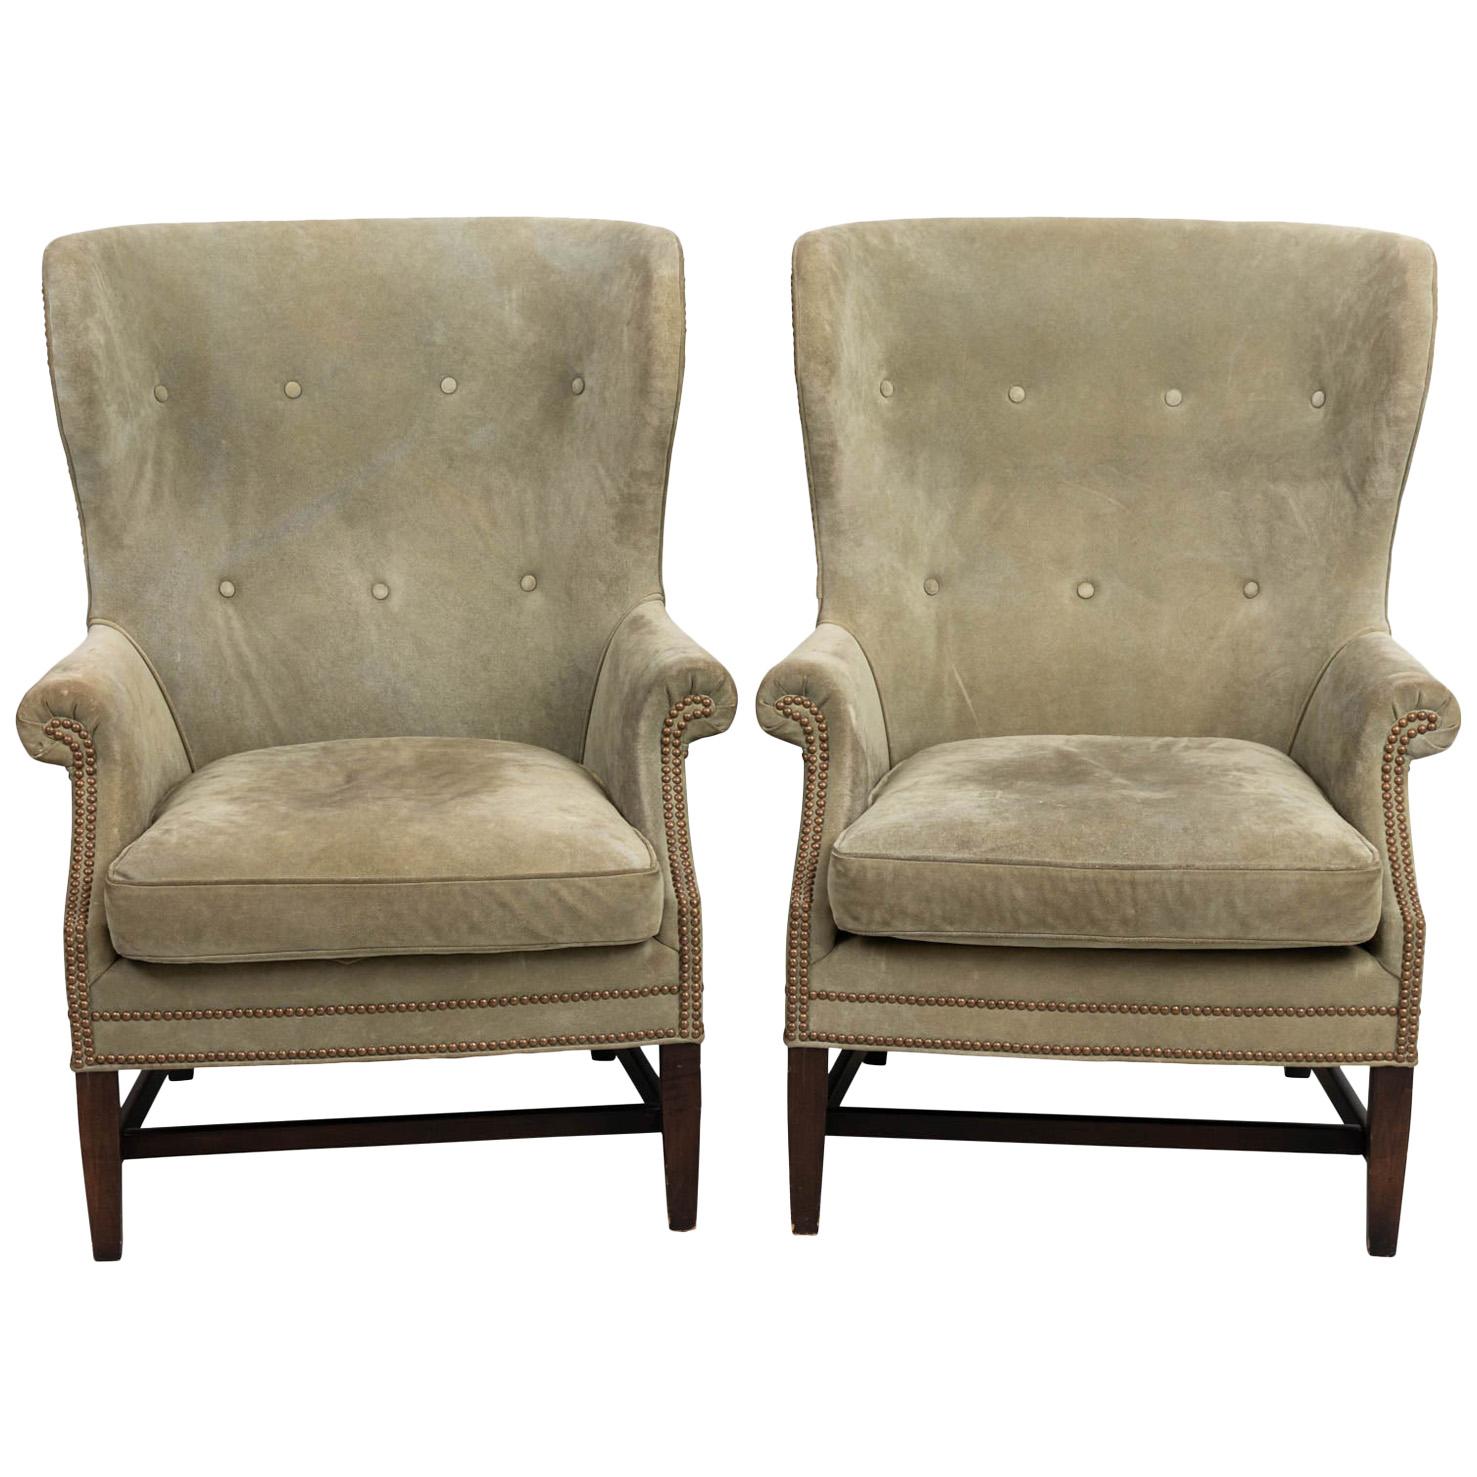 Pair of Green Suede Upholstered Wing Back Chairs